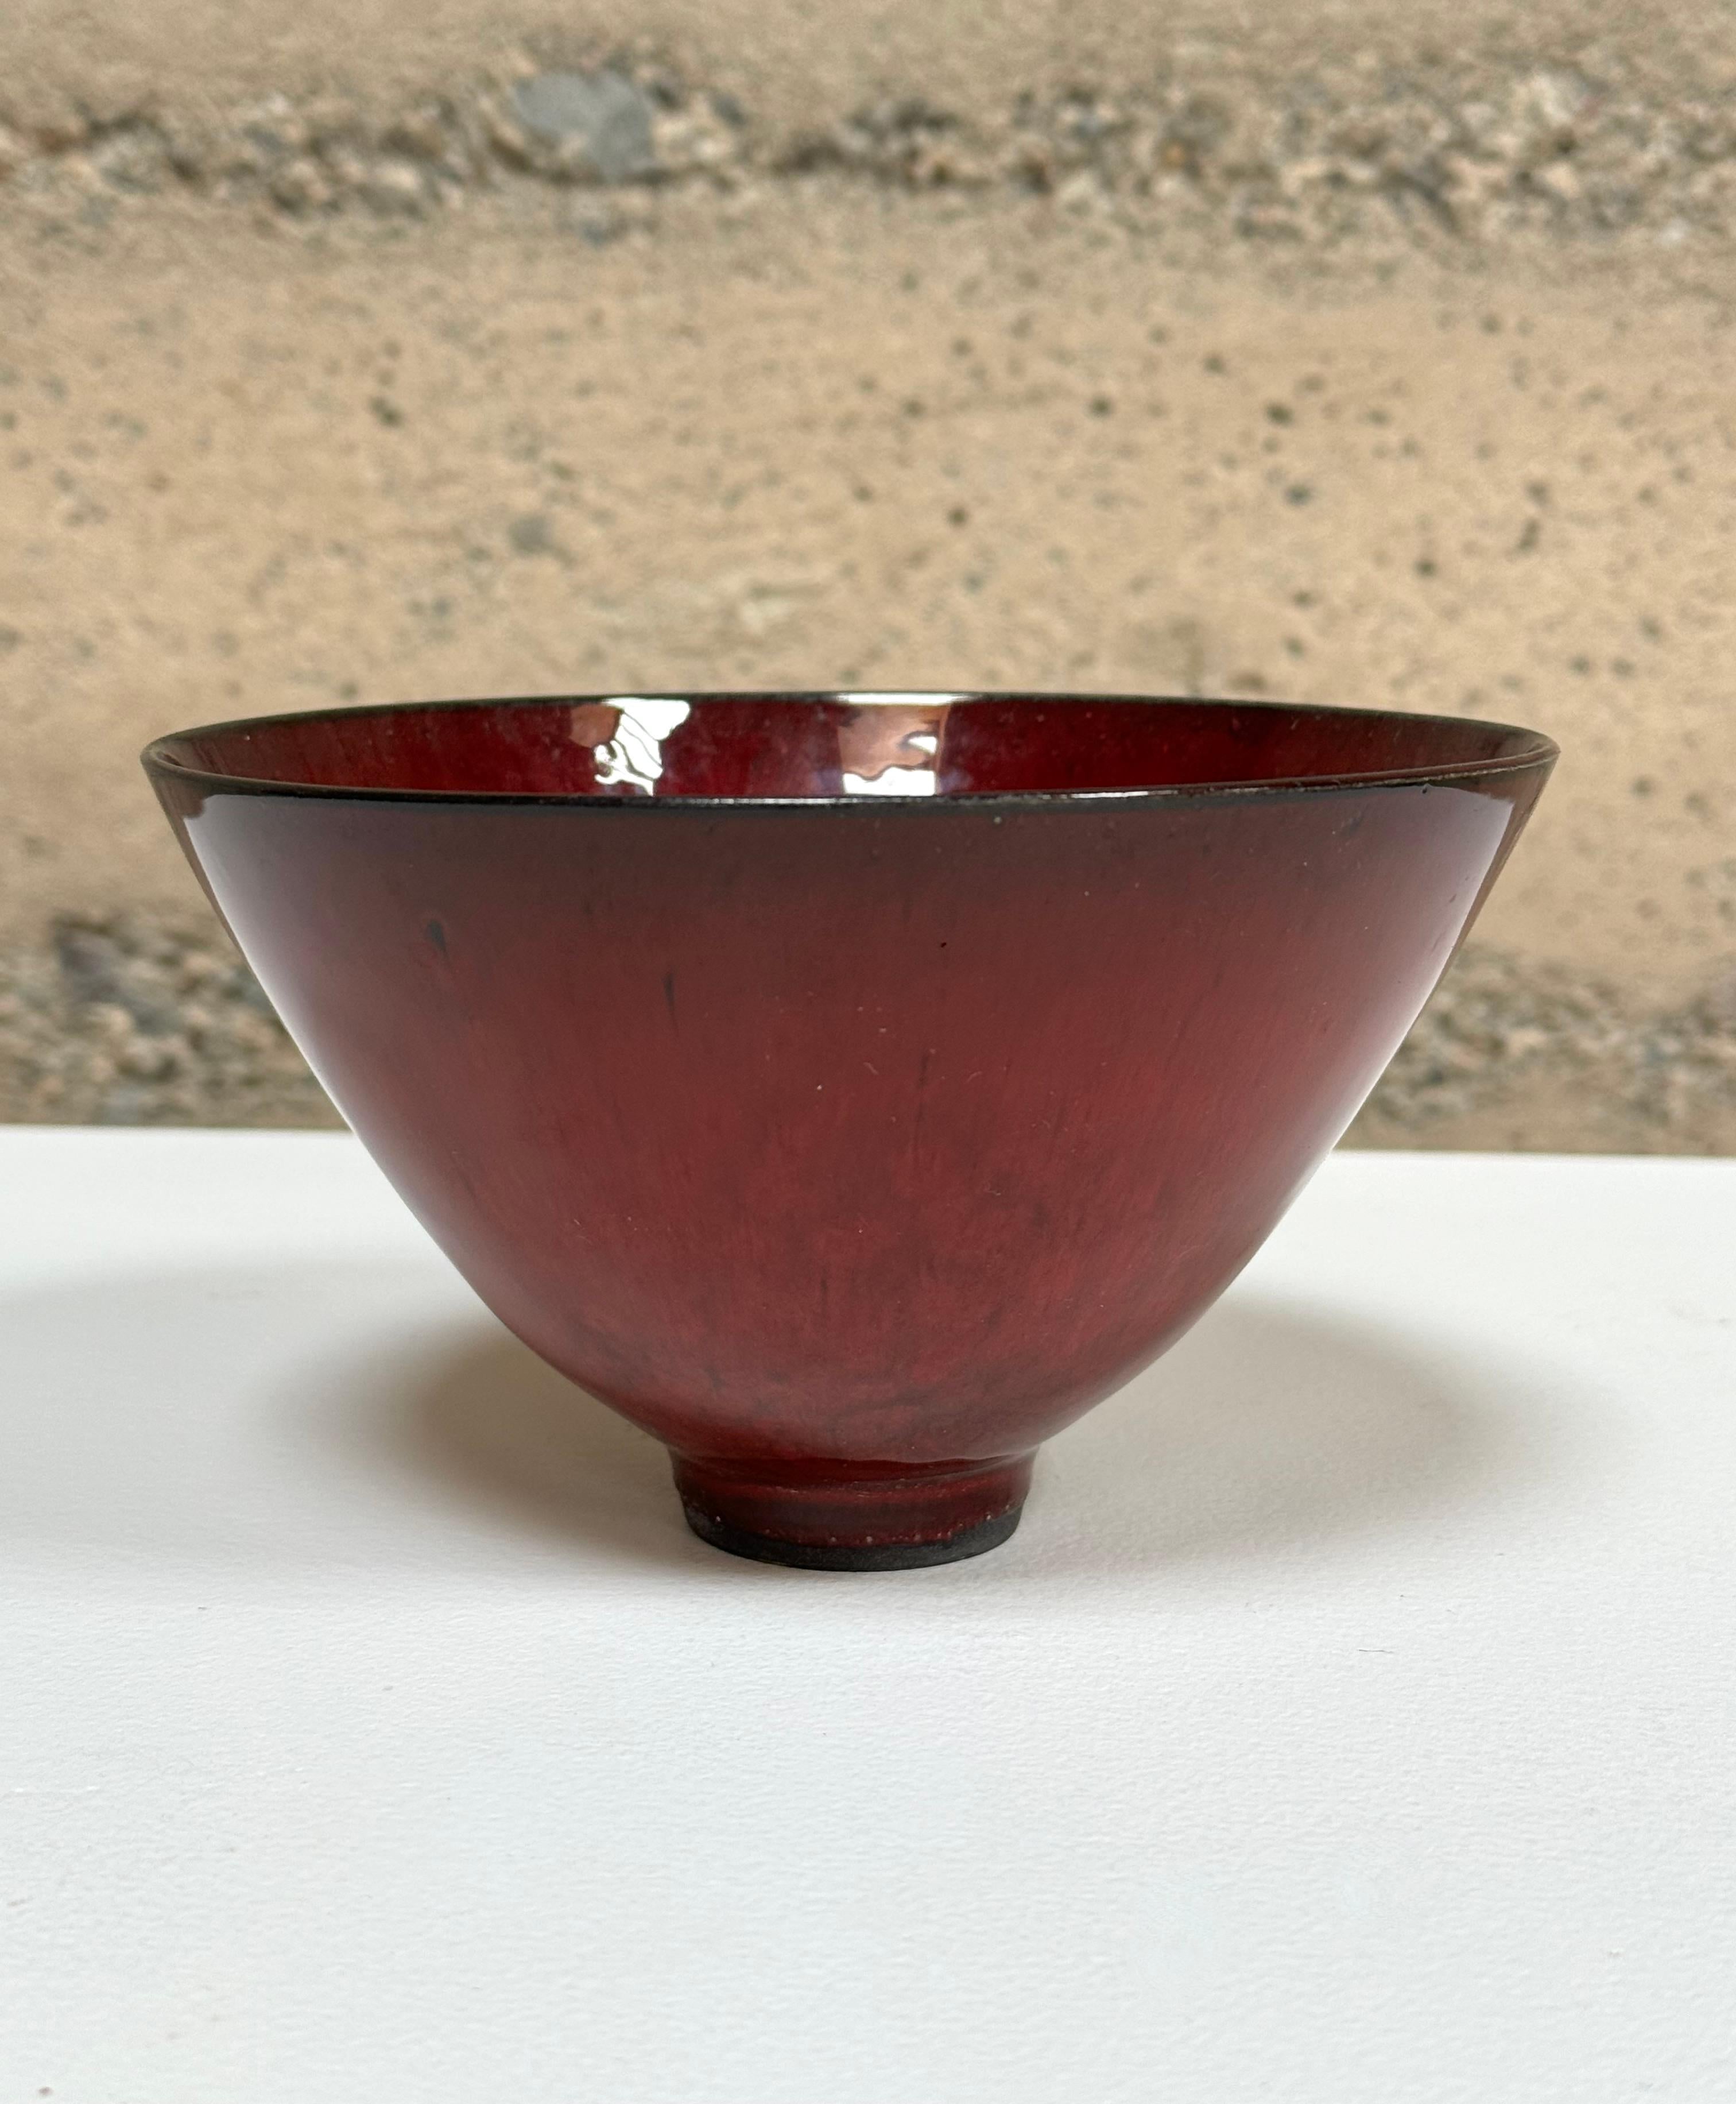 Deep red glaze art bowl by Bay Area artist James Lovera (1920-2015), he was known for his thin walled vessels and bowls with dramatic glazes, this piece those marks. James Lovera’s fascination with the bowl form led him to produce a large focused